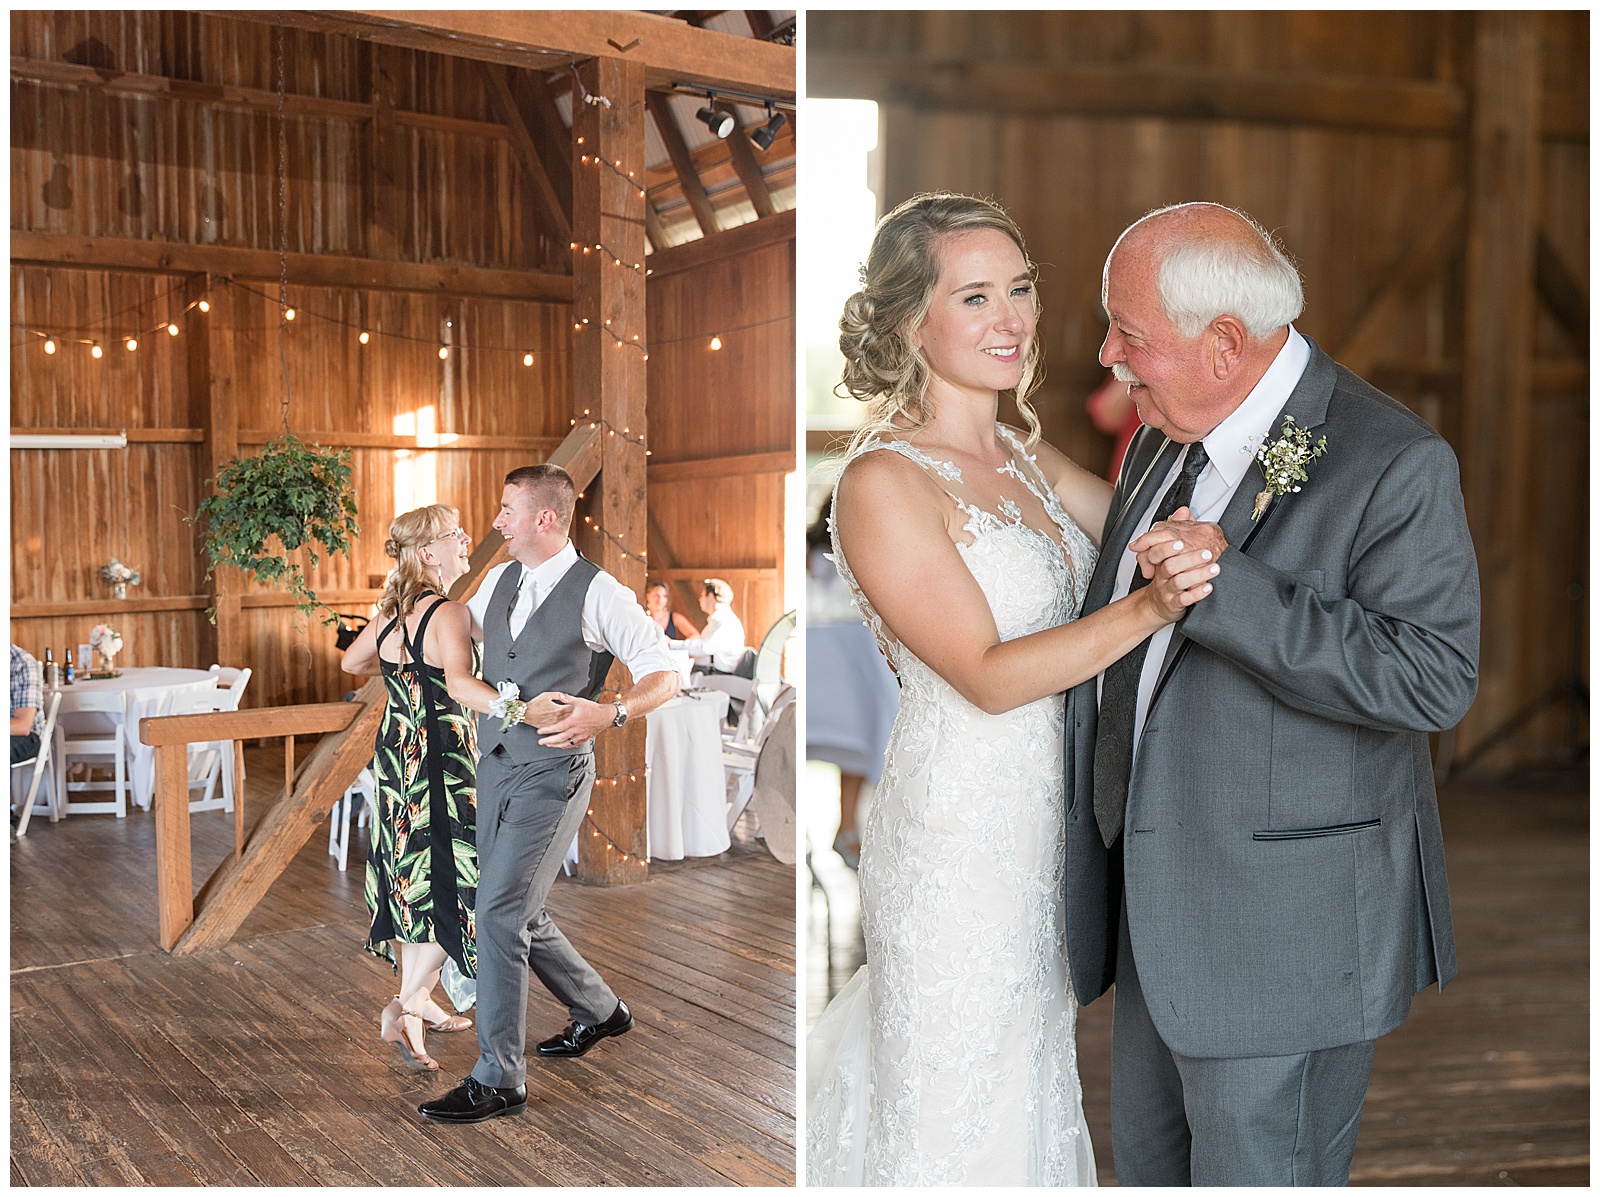 the mother of the groom is on the left and the groom is on the right and they are facing each other and holding hands while dancing together inside the barn reception area at Lakefield Weddings in Manheim, PA, a close up photo of the bride on the left and the father of the bride on the right and they are facing each other and holding hands and dancing together with the bride smiling and looking off in the distance towards the right side of the photo while her dad is looking at her in the barn reception area at Lakefield Weddings in Manheim, PA